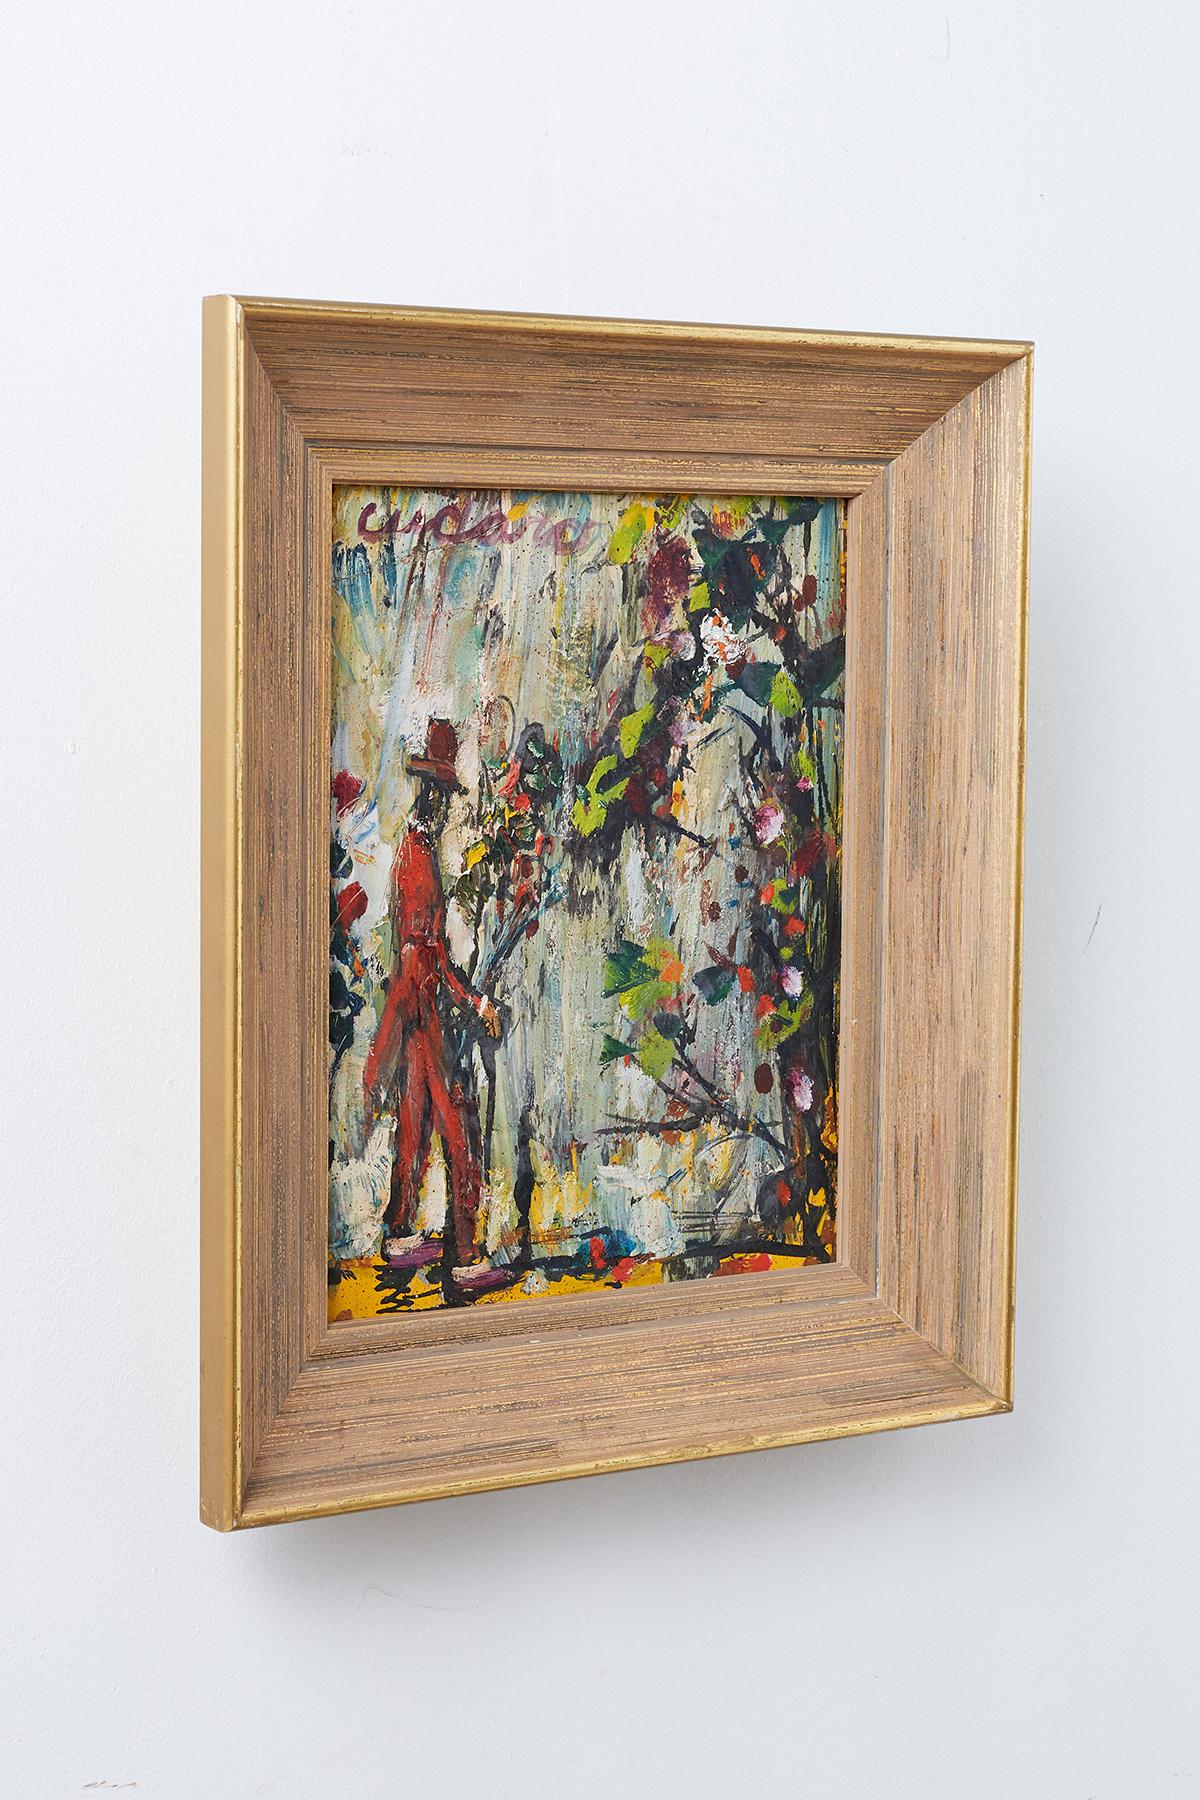 Colorful oil on board figurative painting by Pascal Cucaro. Features thick applied paint on Masonite board typical of Cucaro's style. Depicts a clown man in a red suit with a hat holding balloons with a busy background. Set in a deep giltwood frame.